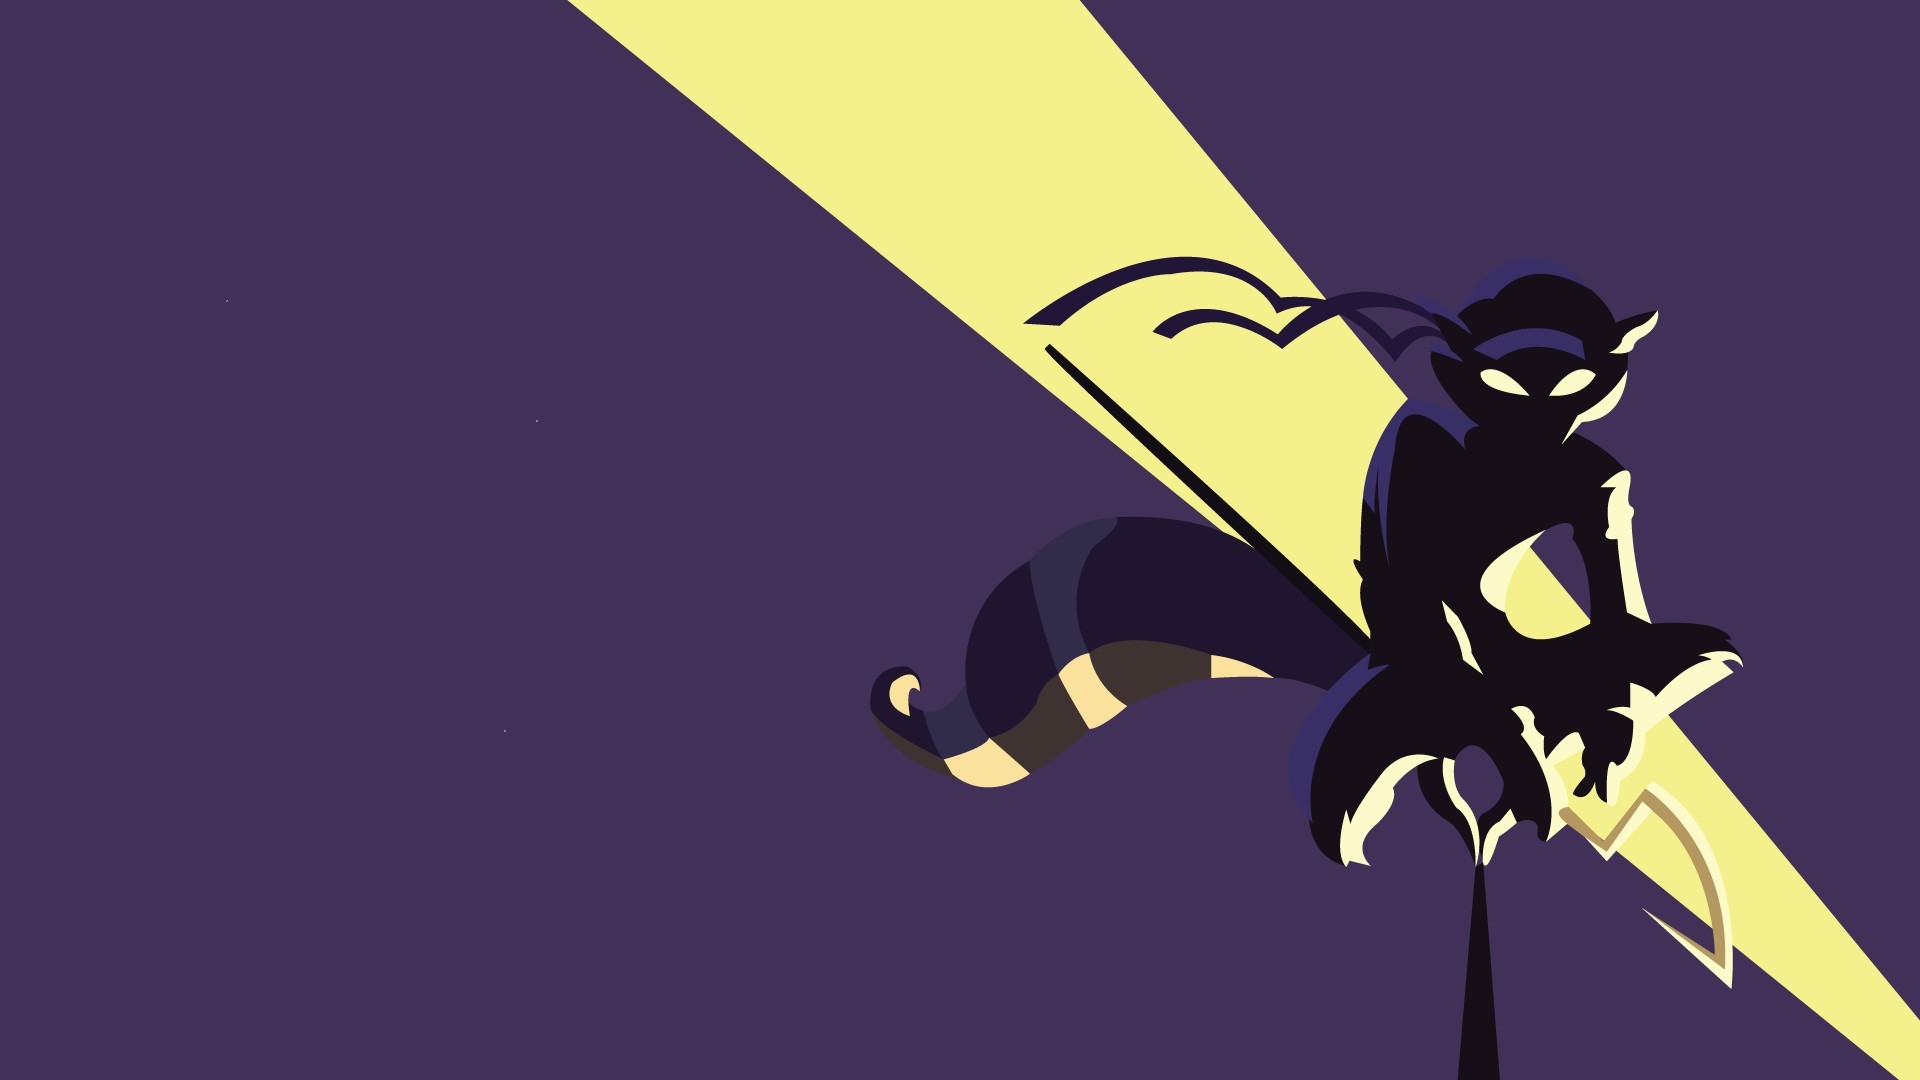 1920x1080  Sly Cooper by LimeCatMastr Sly Cooper by LimeCatMastr